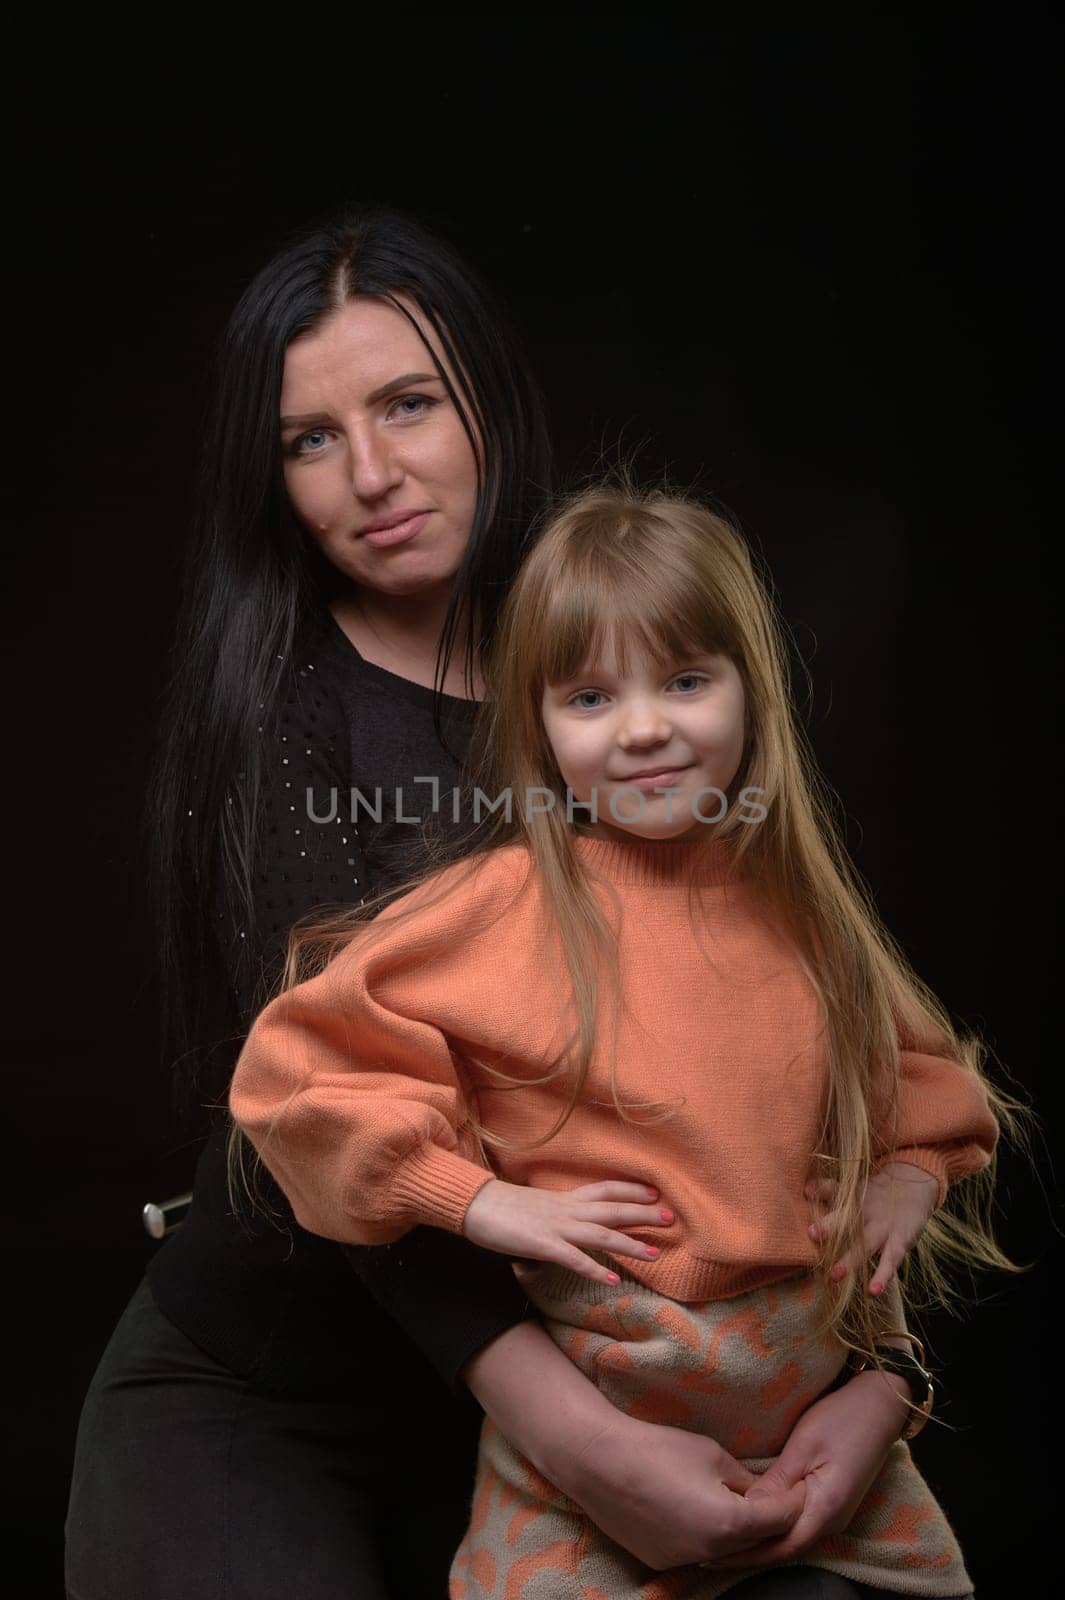 mother and daughter studio portrait happy family 5 by Mixa74